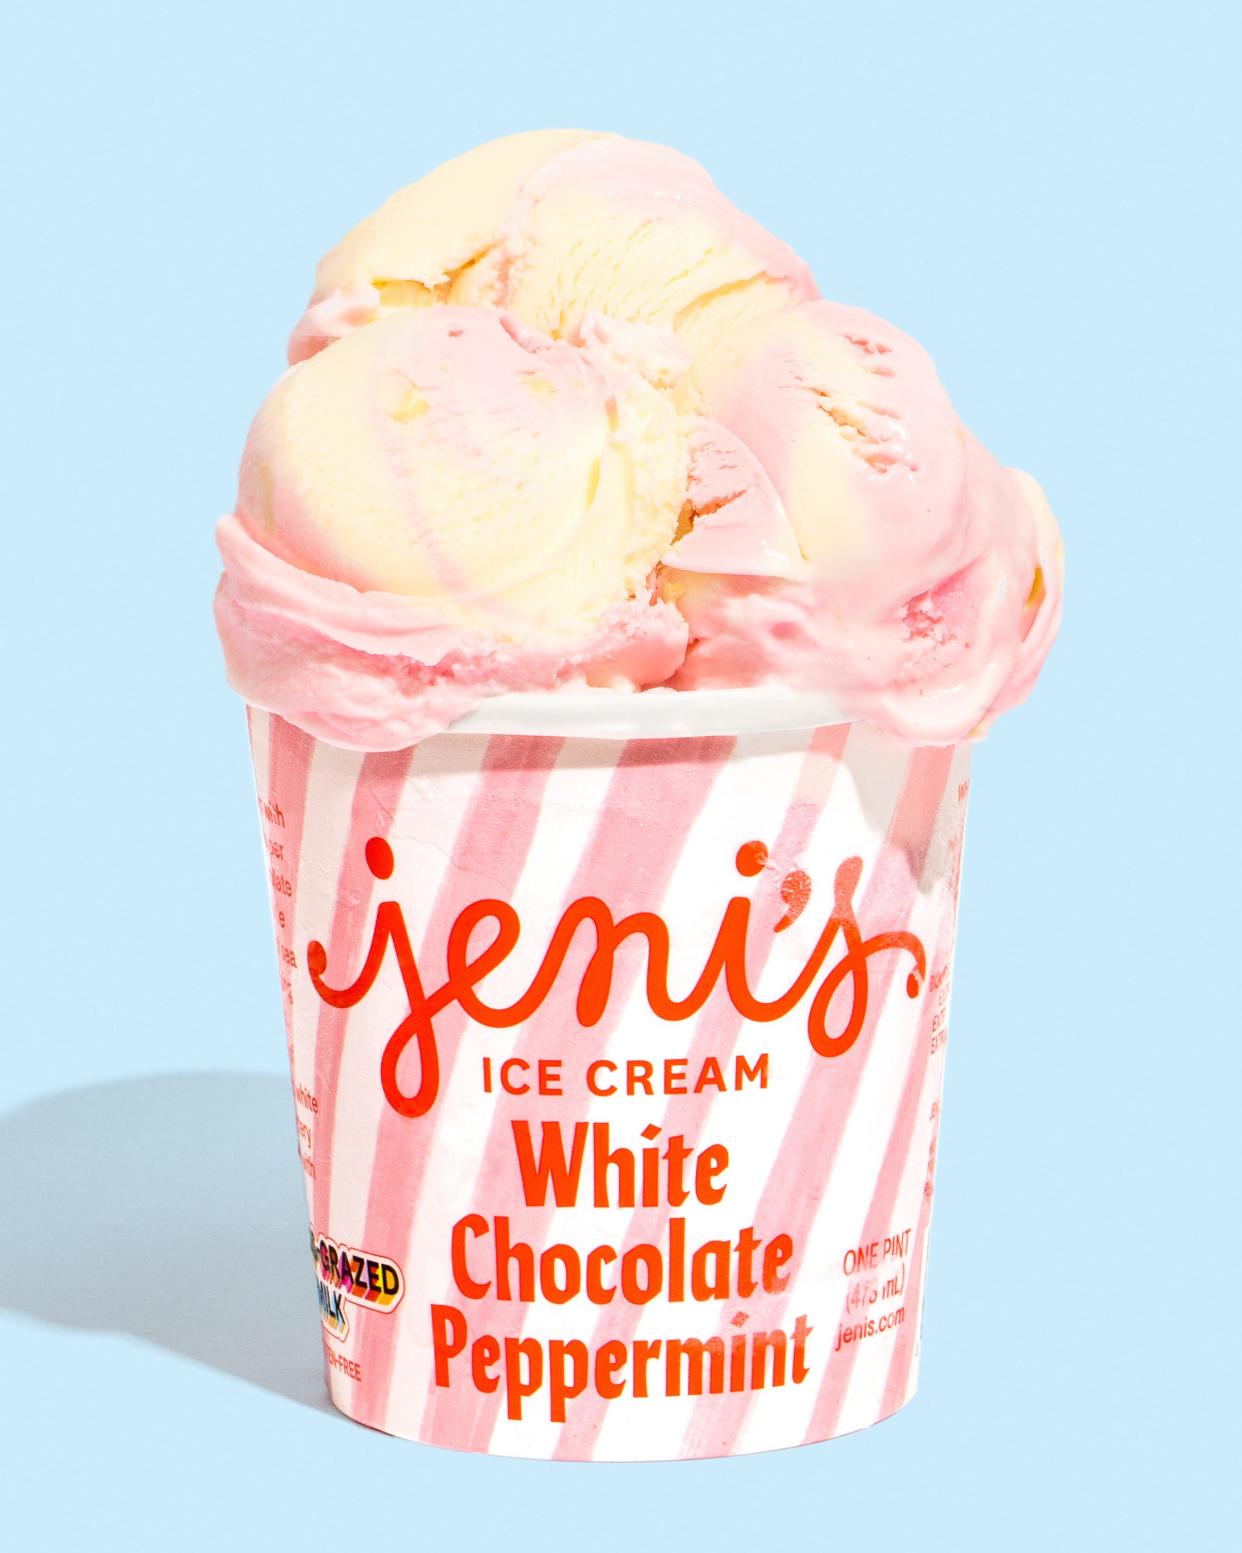 White Chocolate Peppermint is one of five holiday flavors introduced this year by Jeni's. The others are Boozy Eggnog, Rum Ball, Merry Berry and Buckeye Frenzy